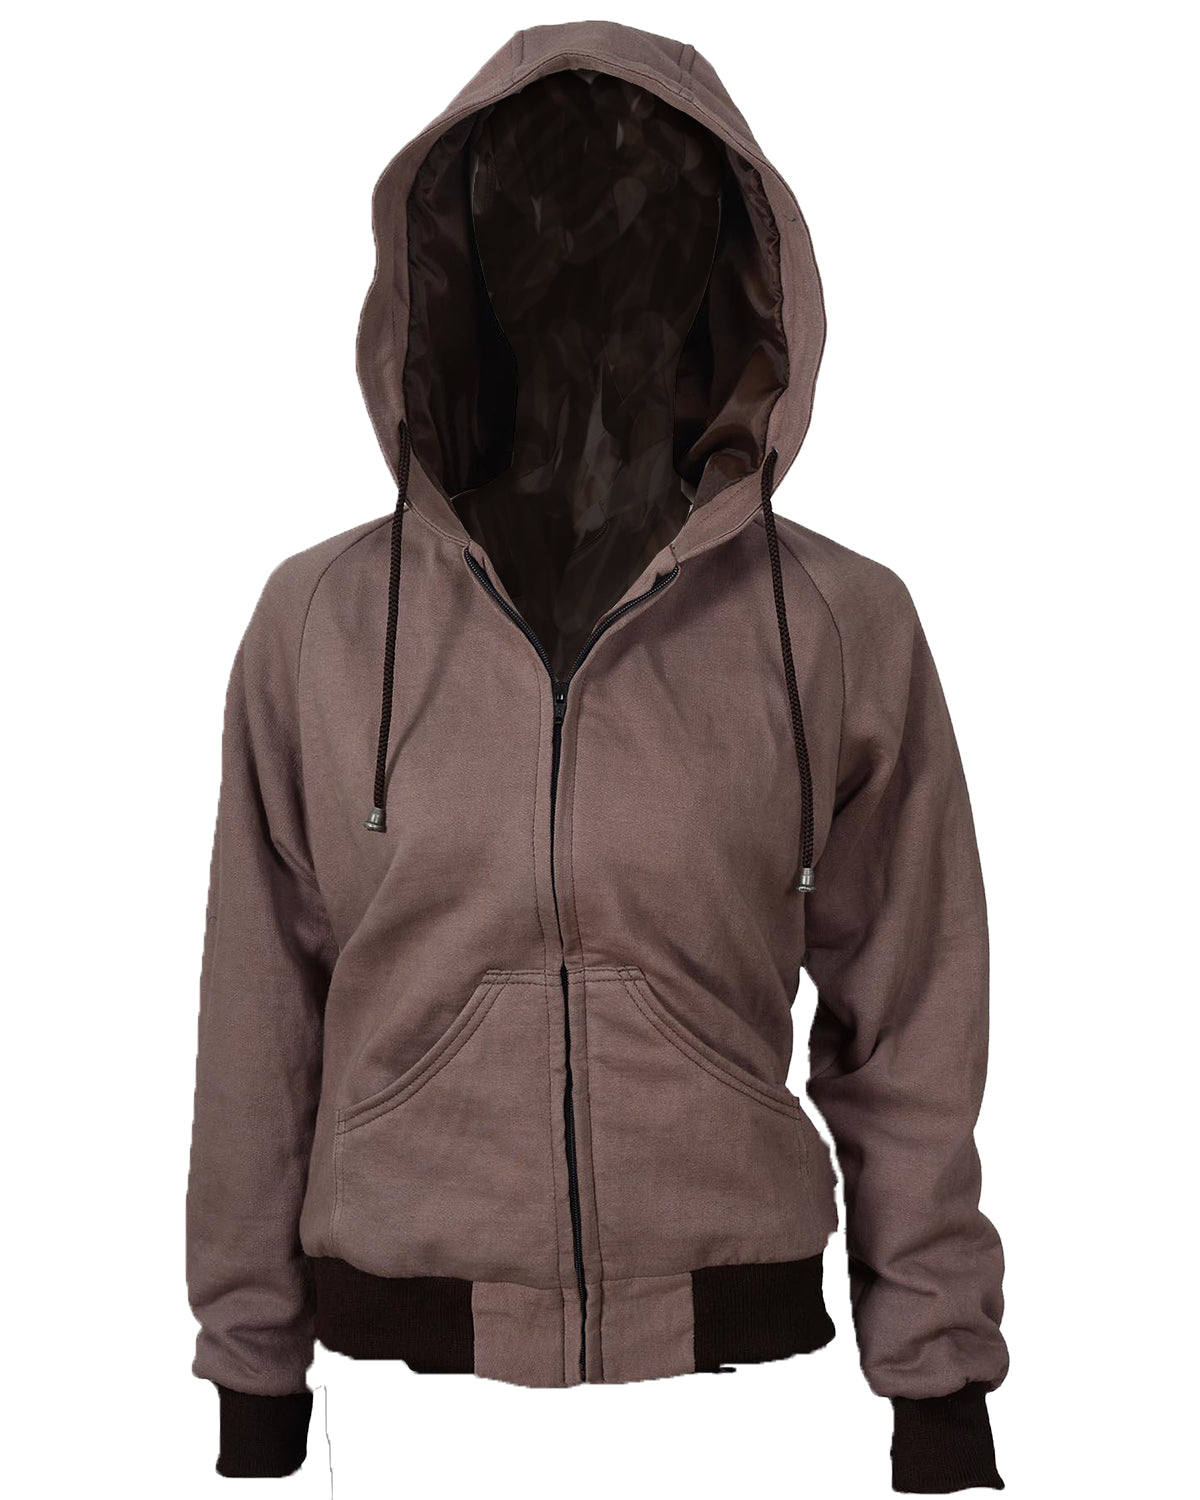 Kelsey Chow Yellowstone Hoodie Jacket | Elite Collection